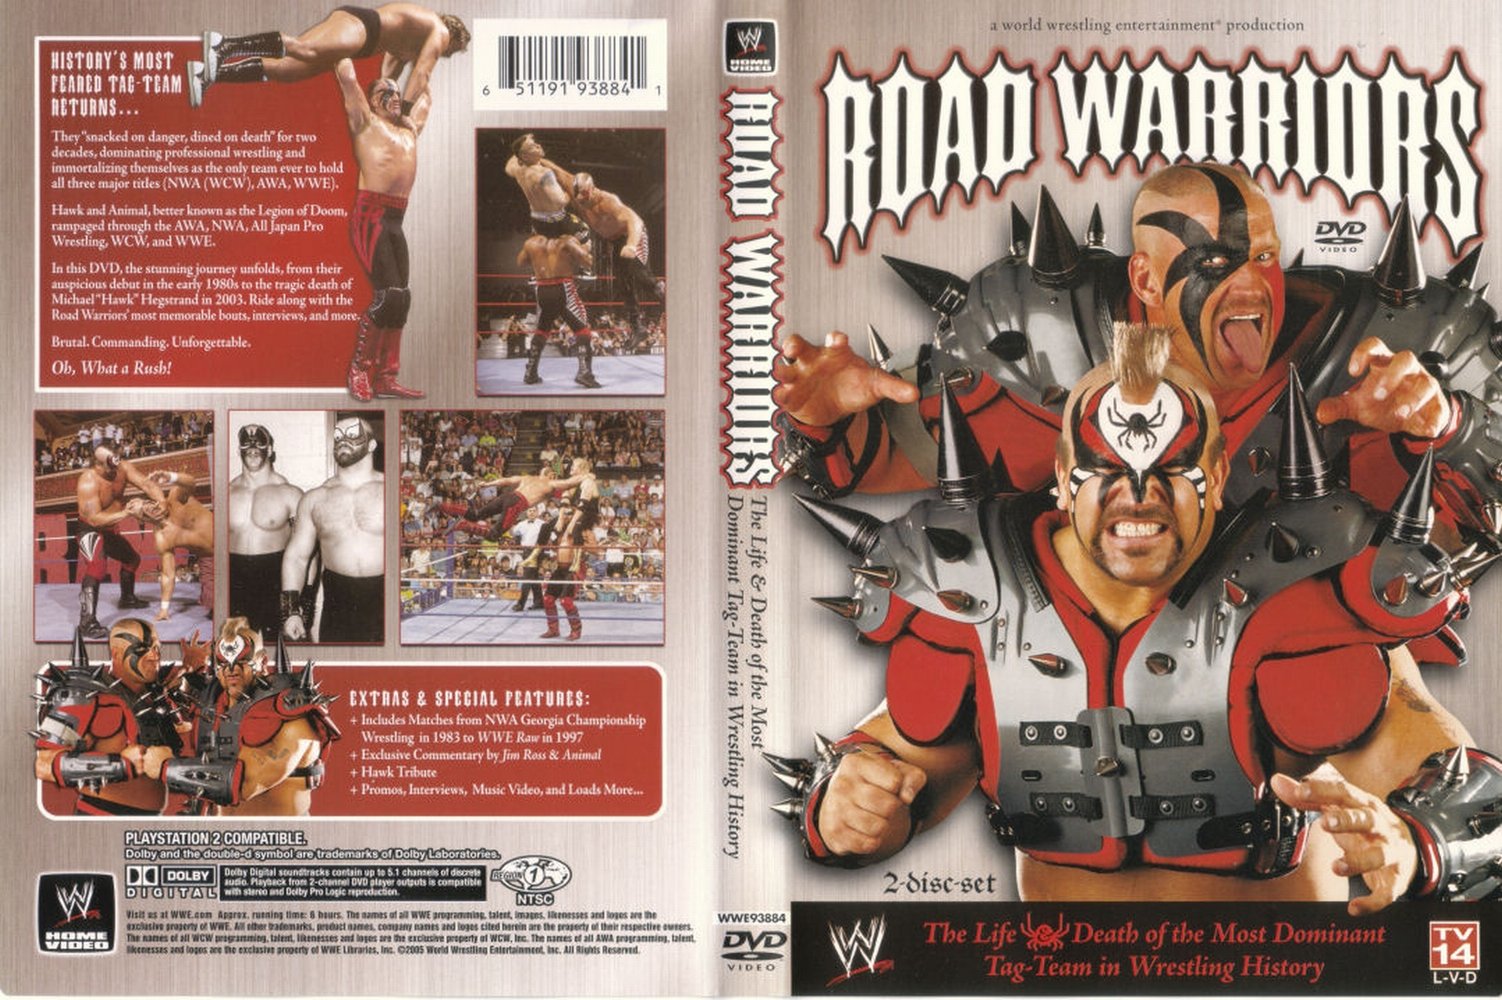 Jaquette DVD WWE Road Warriors The Life And Death